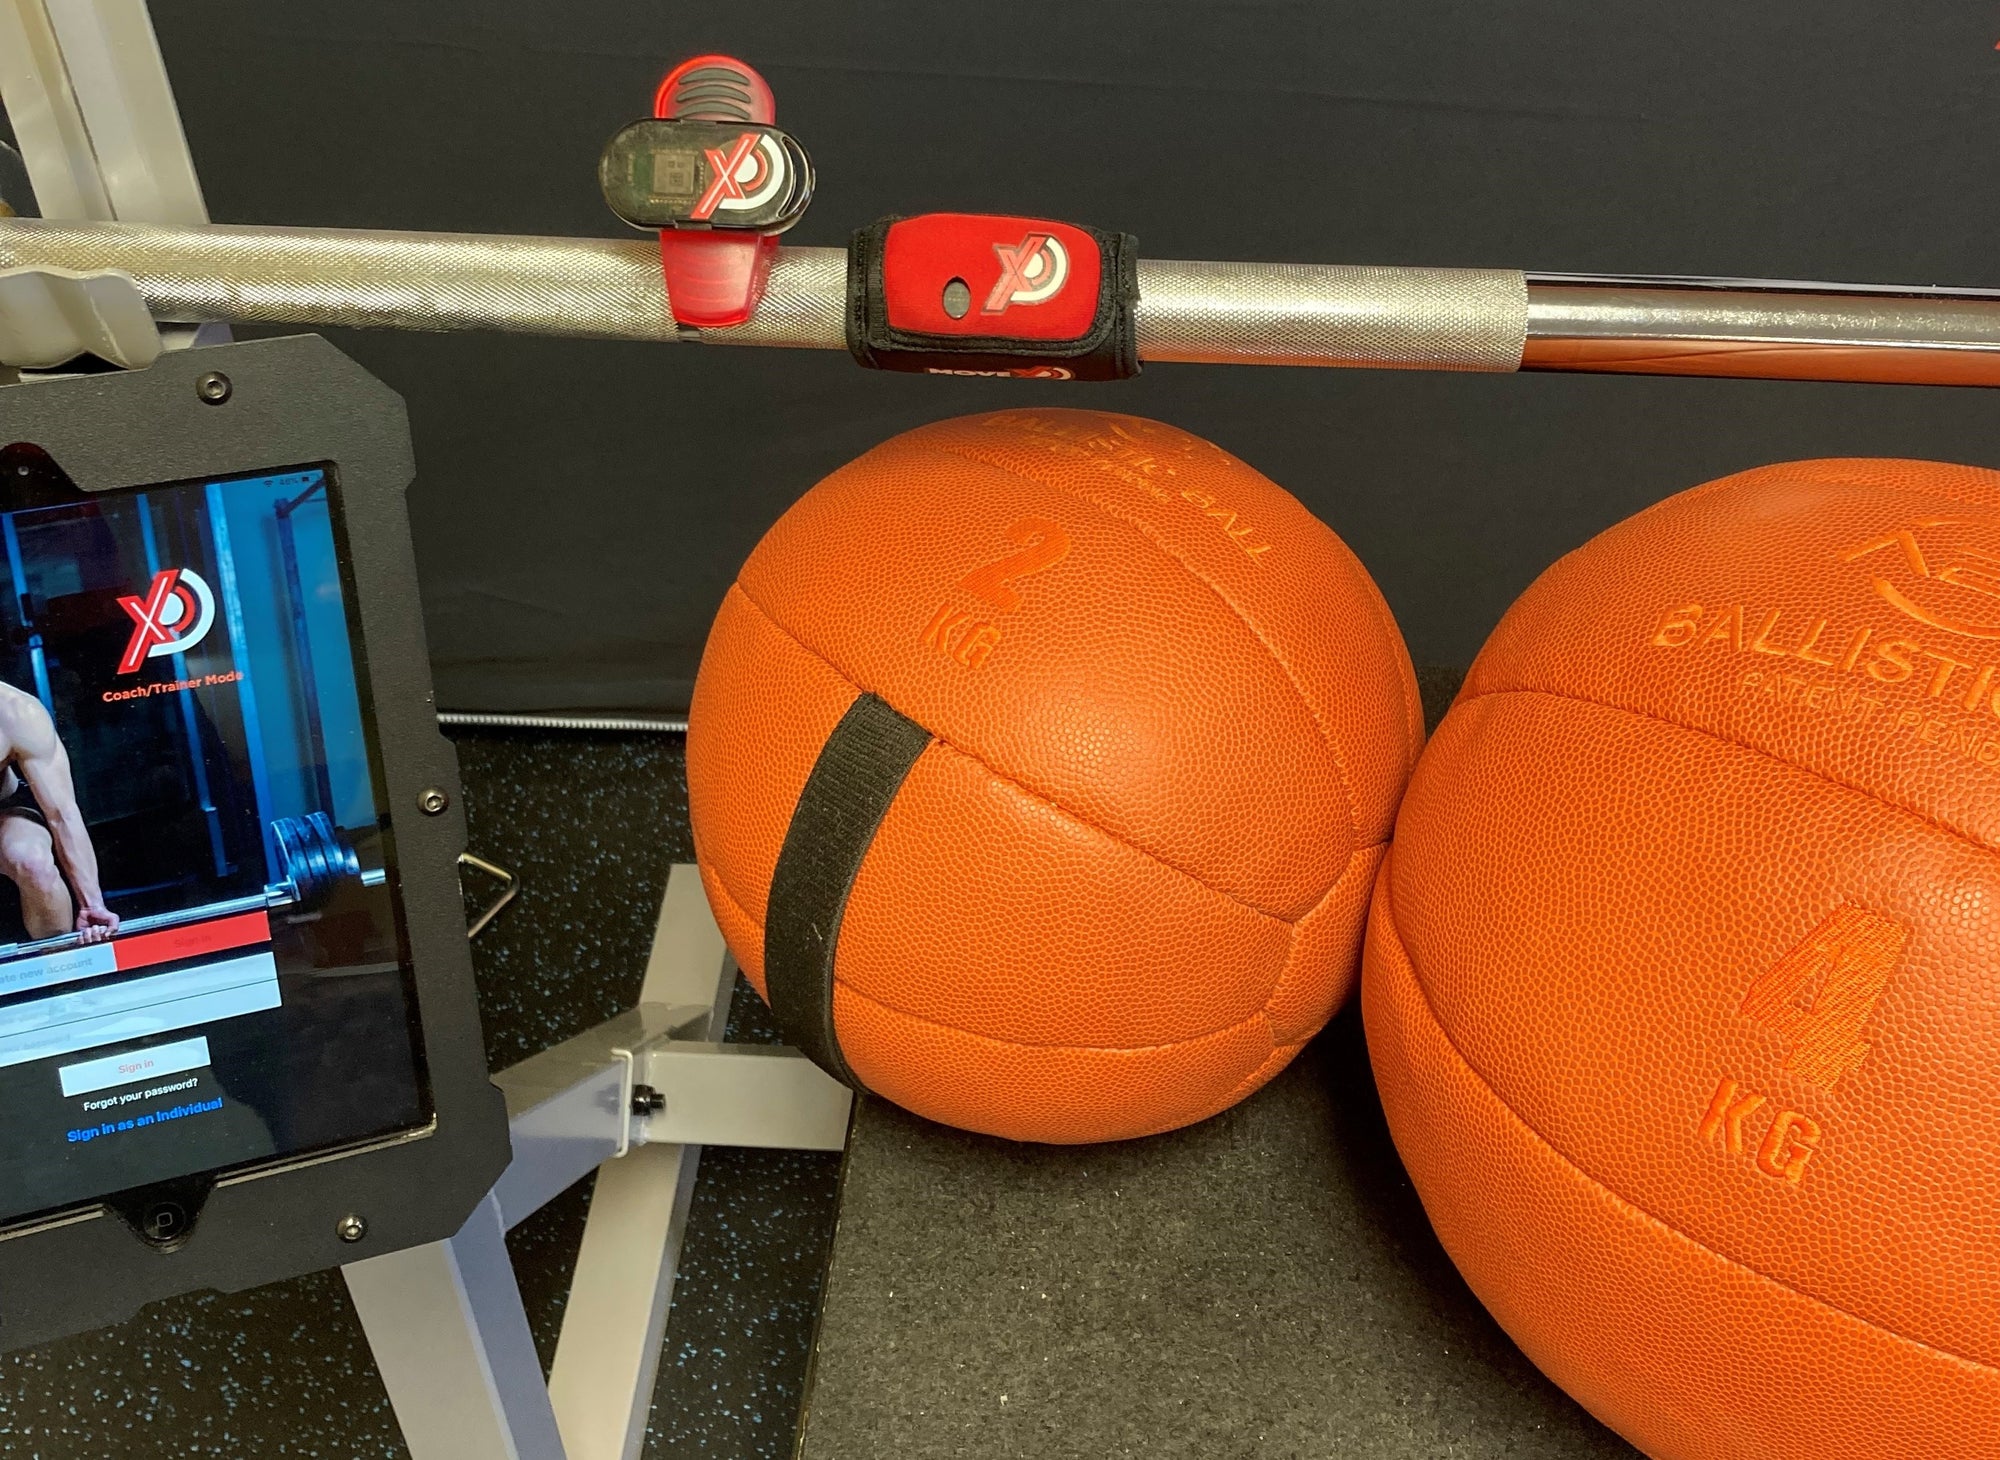 Six Considerations When Making a Velocity-Based Training Sport Tech Purchase